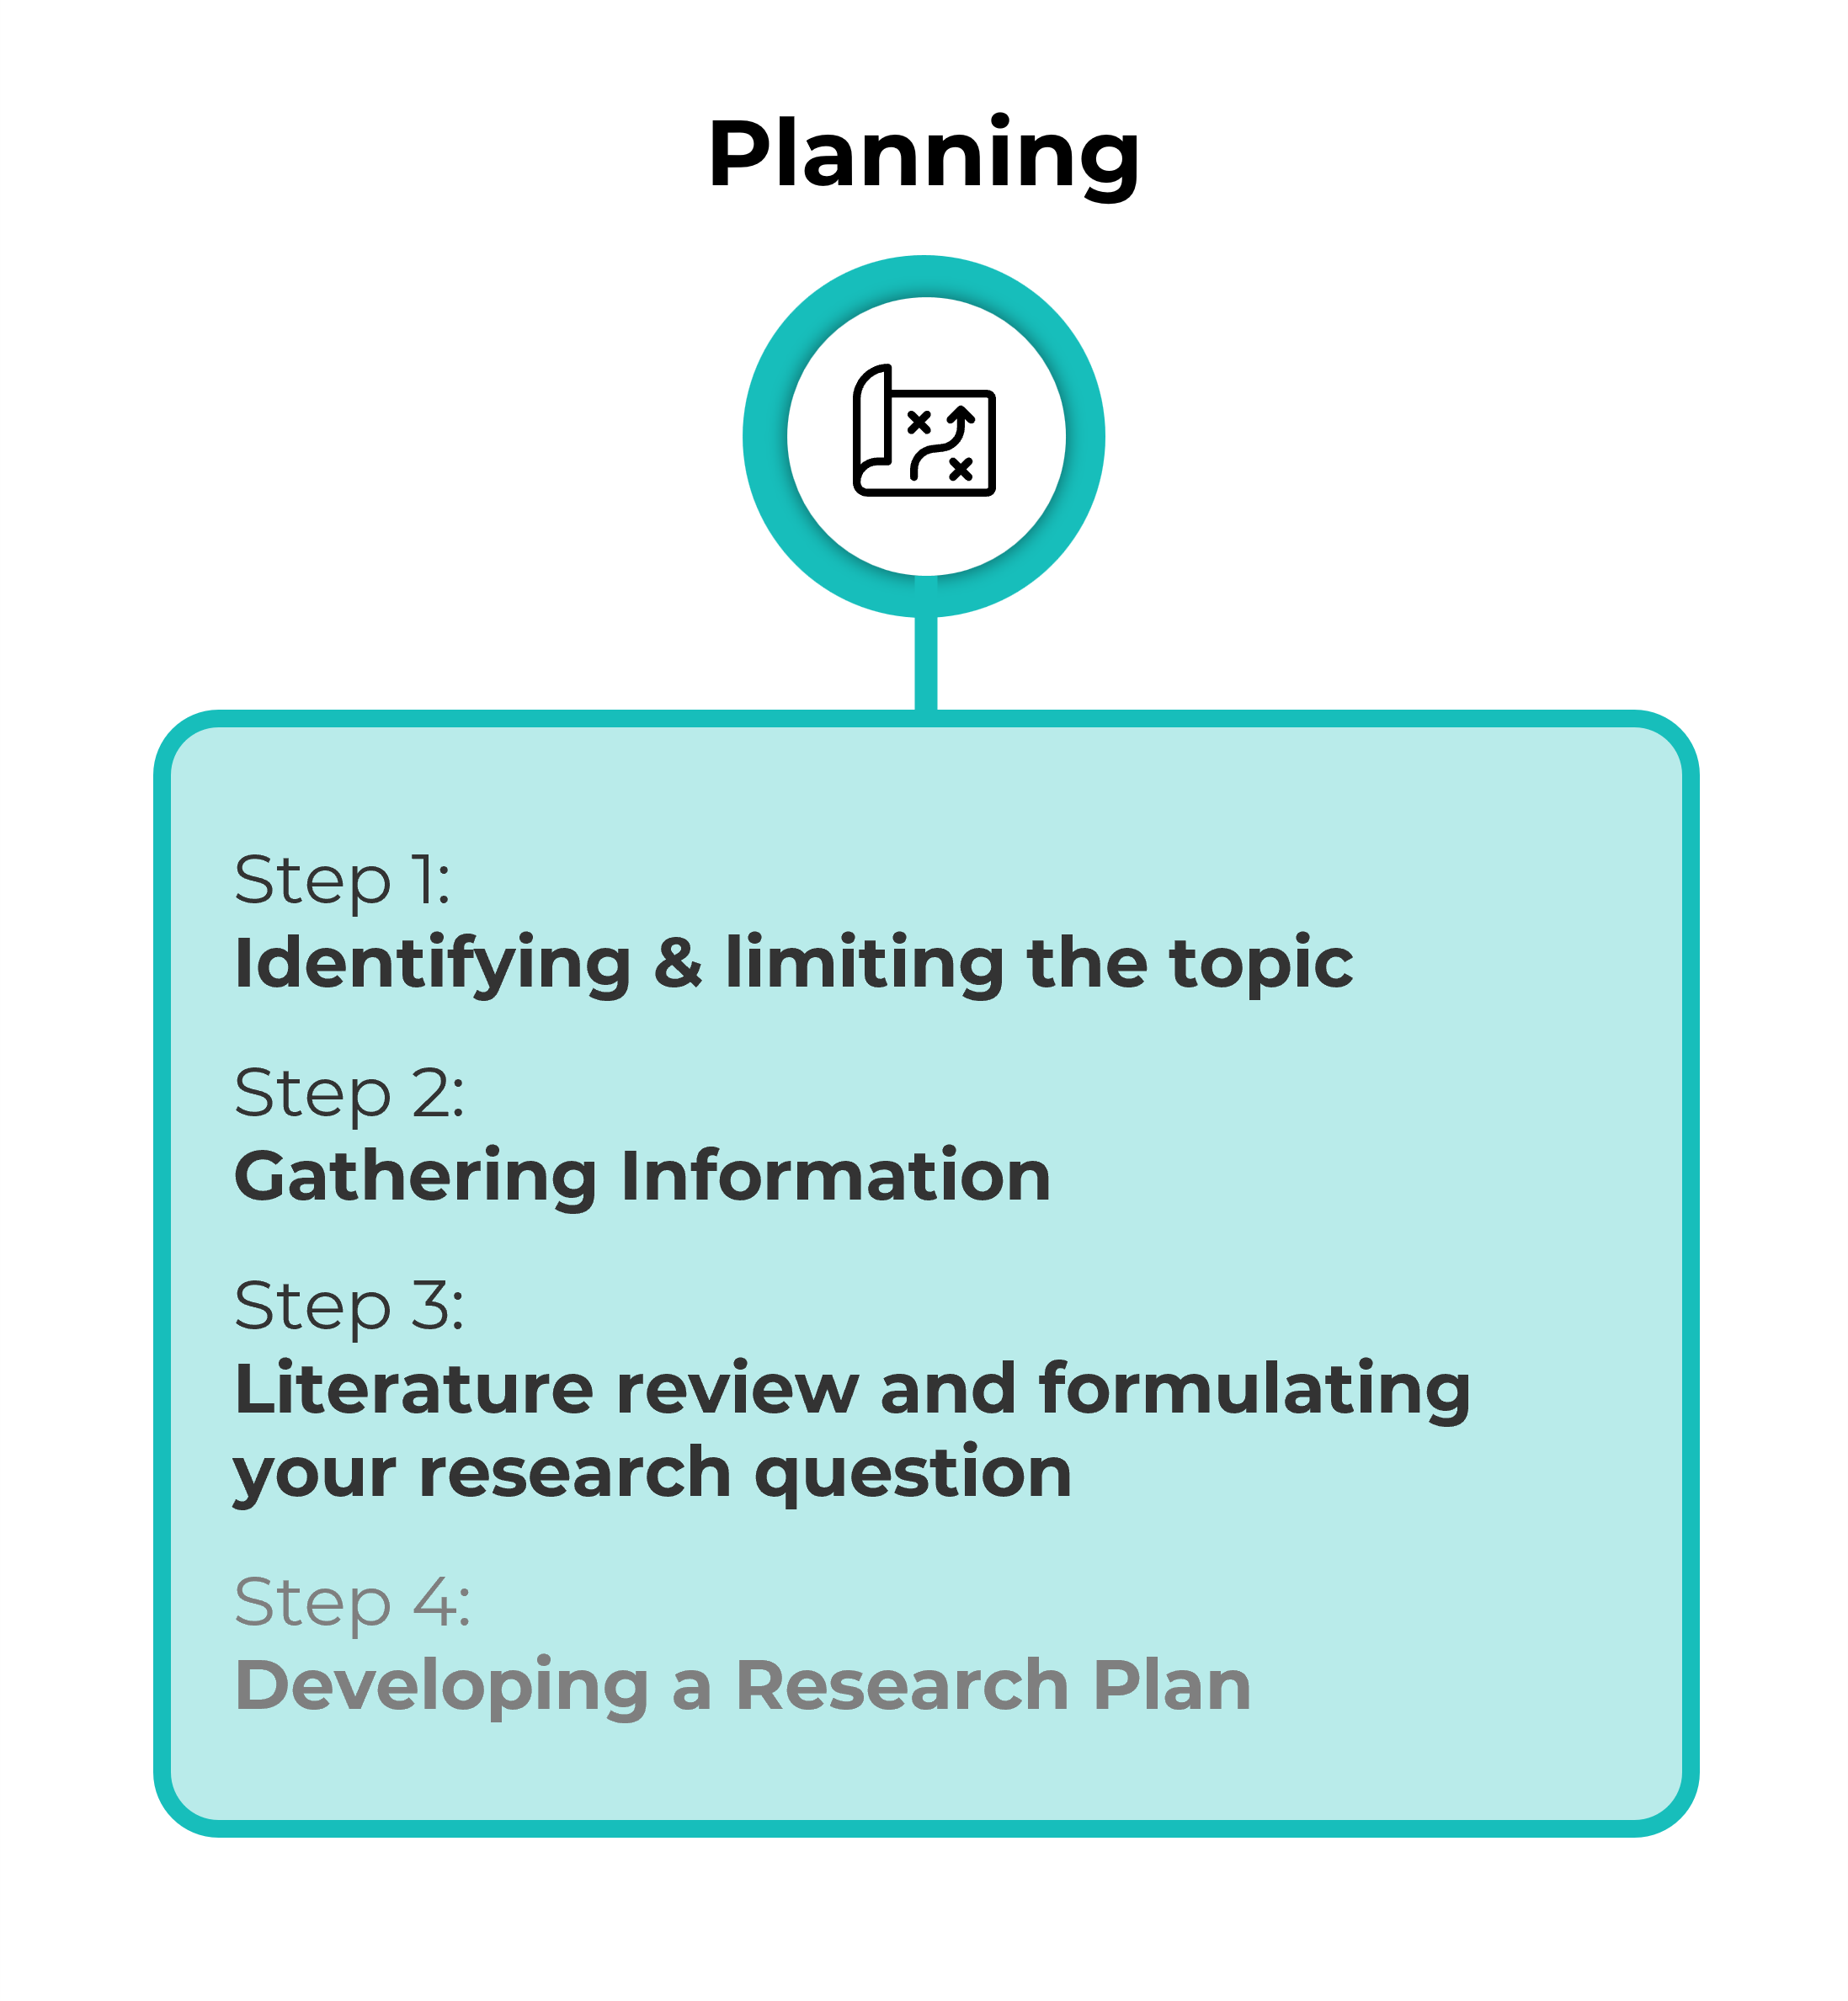 The steps of the planning stage with only the first 3 highlighted